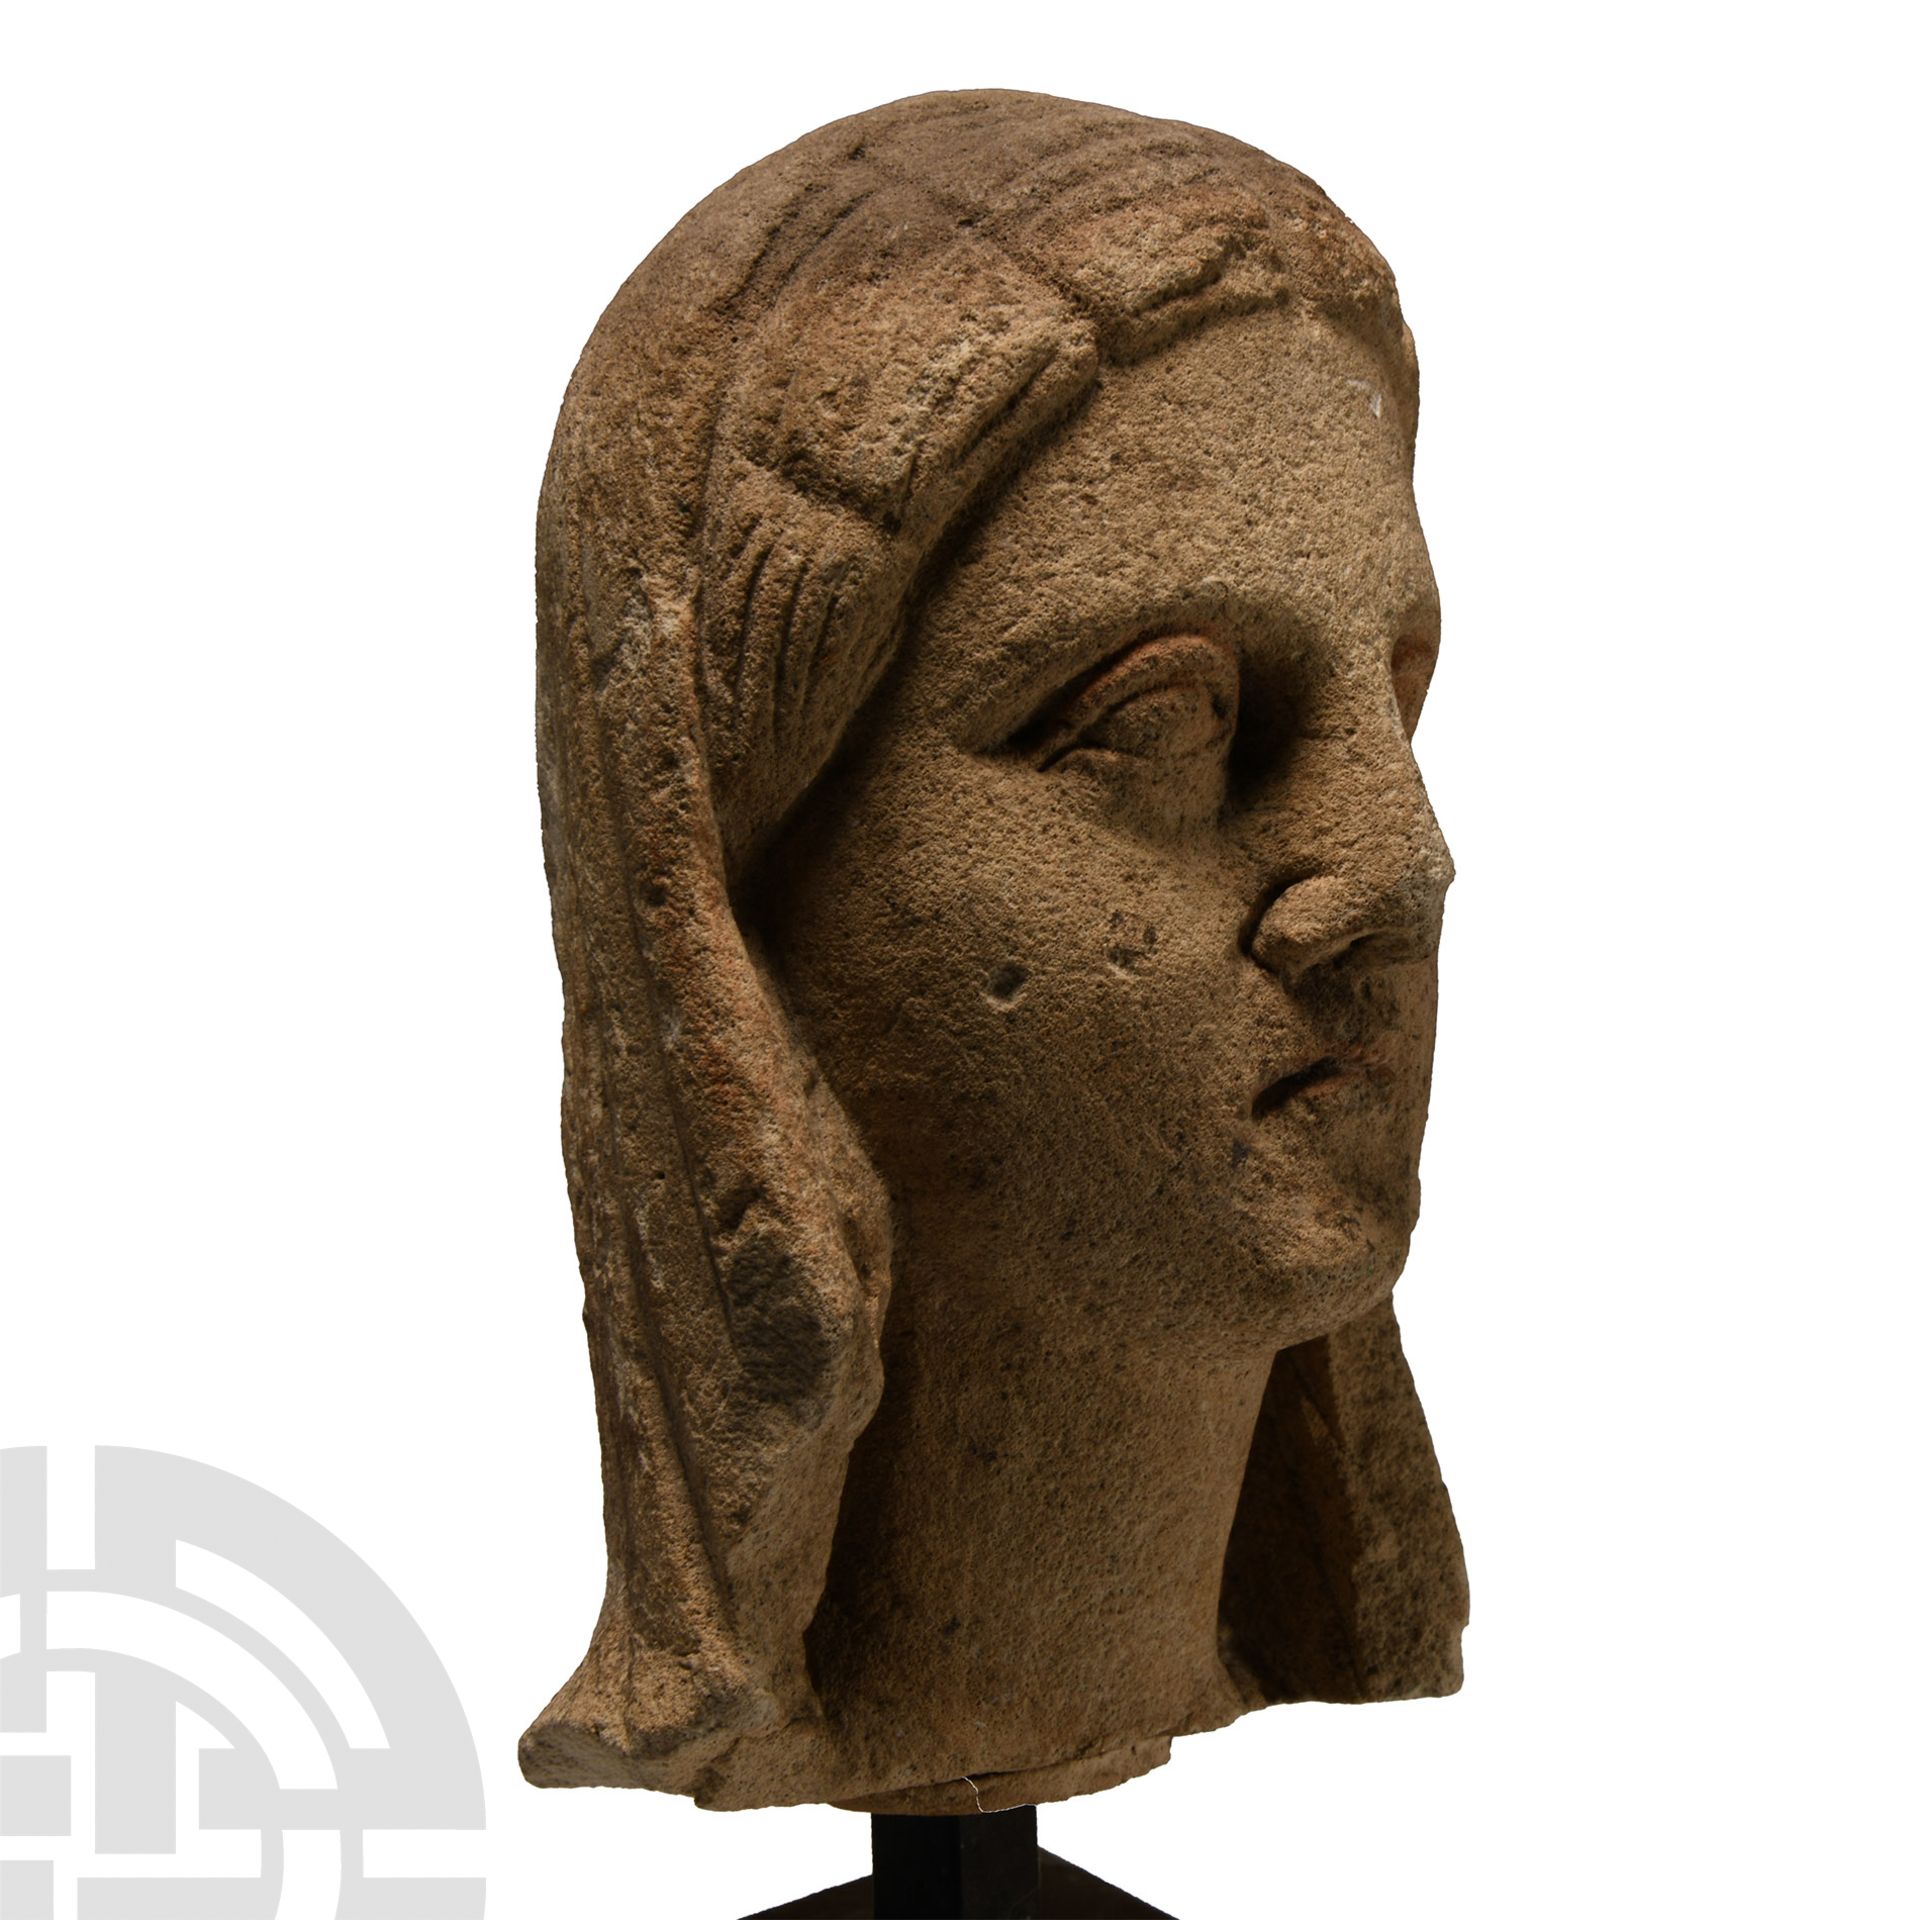 Cypriot Limestone Head of a Goddess - Image 3 of 3